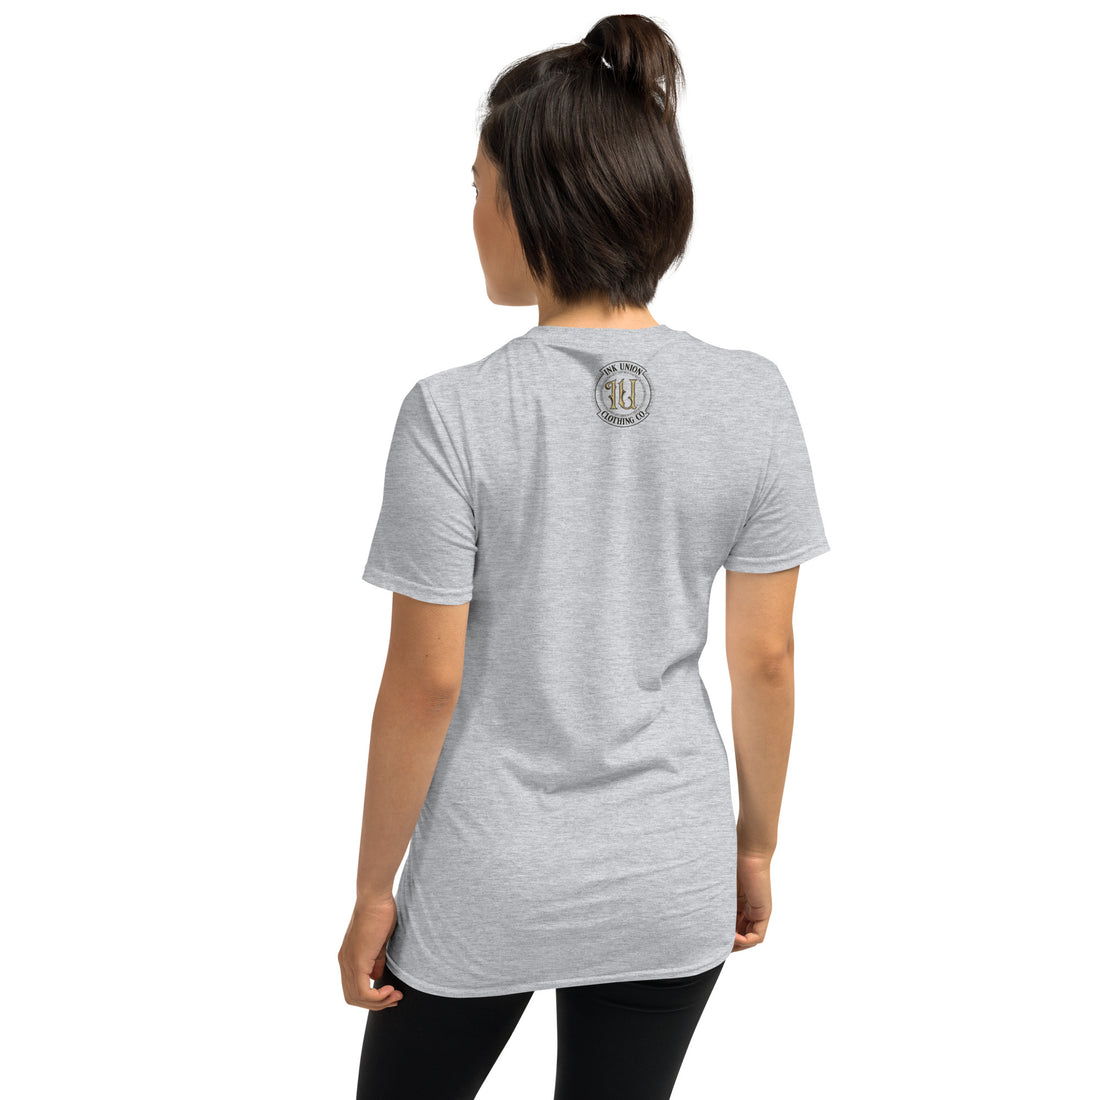 The rear view of an attractive woman wearing a light grey t-shirt with a small gold and black Ink Union badge logo centered just under the neckline. 